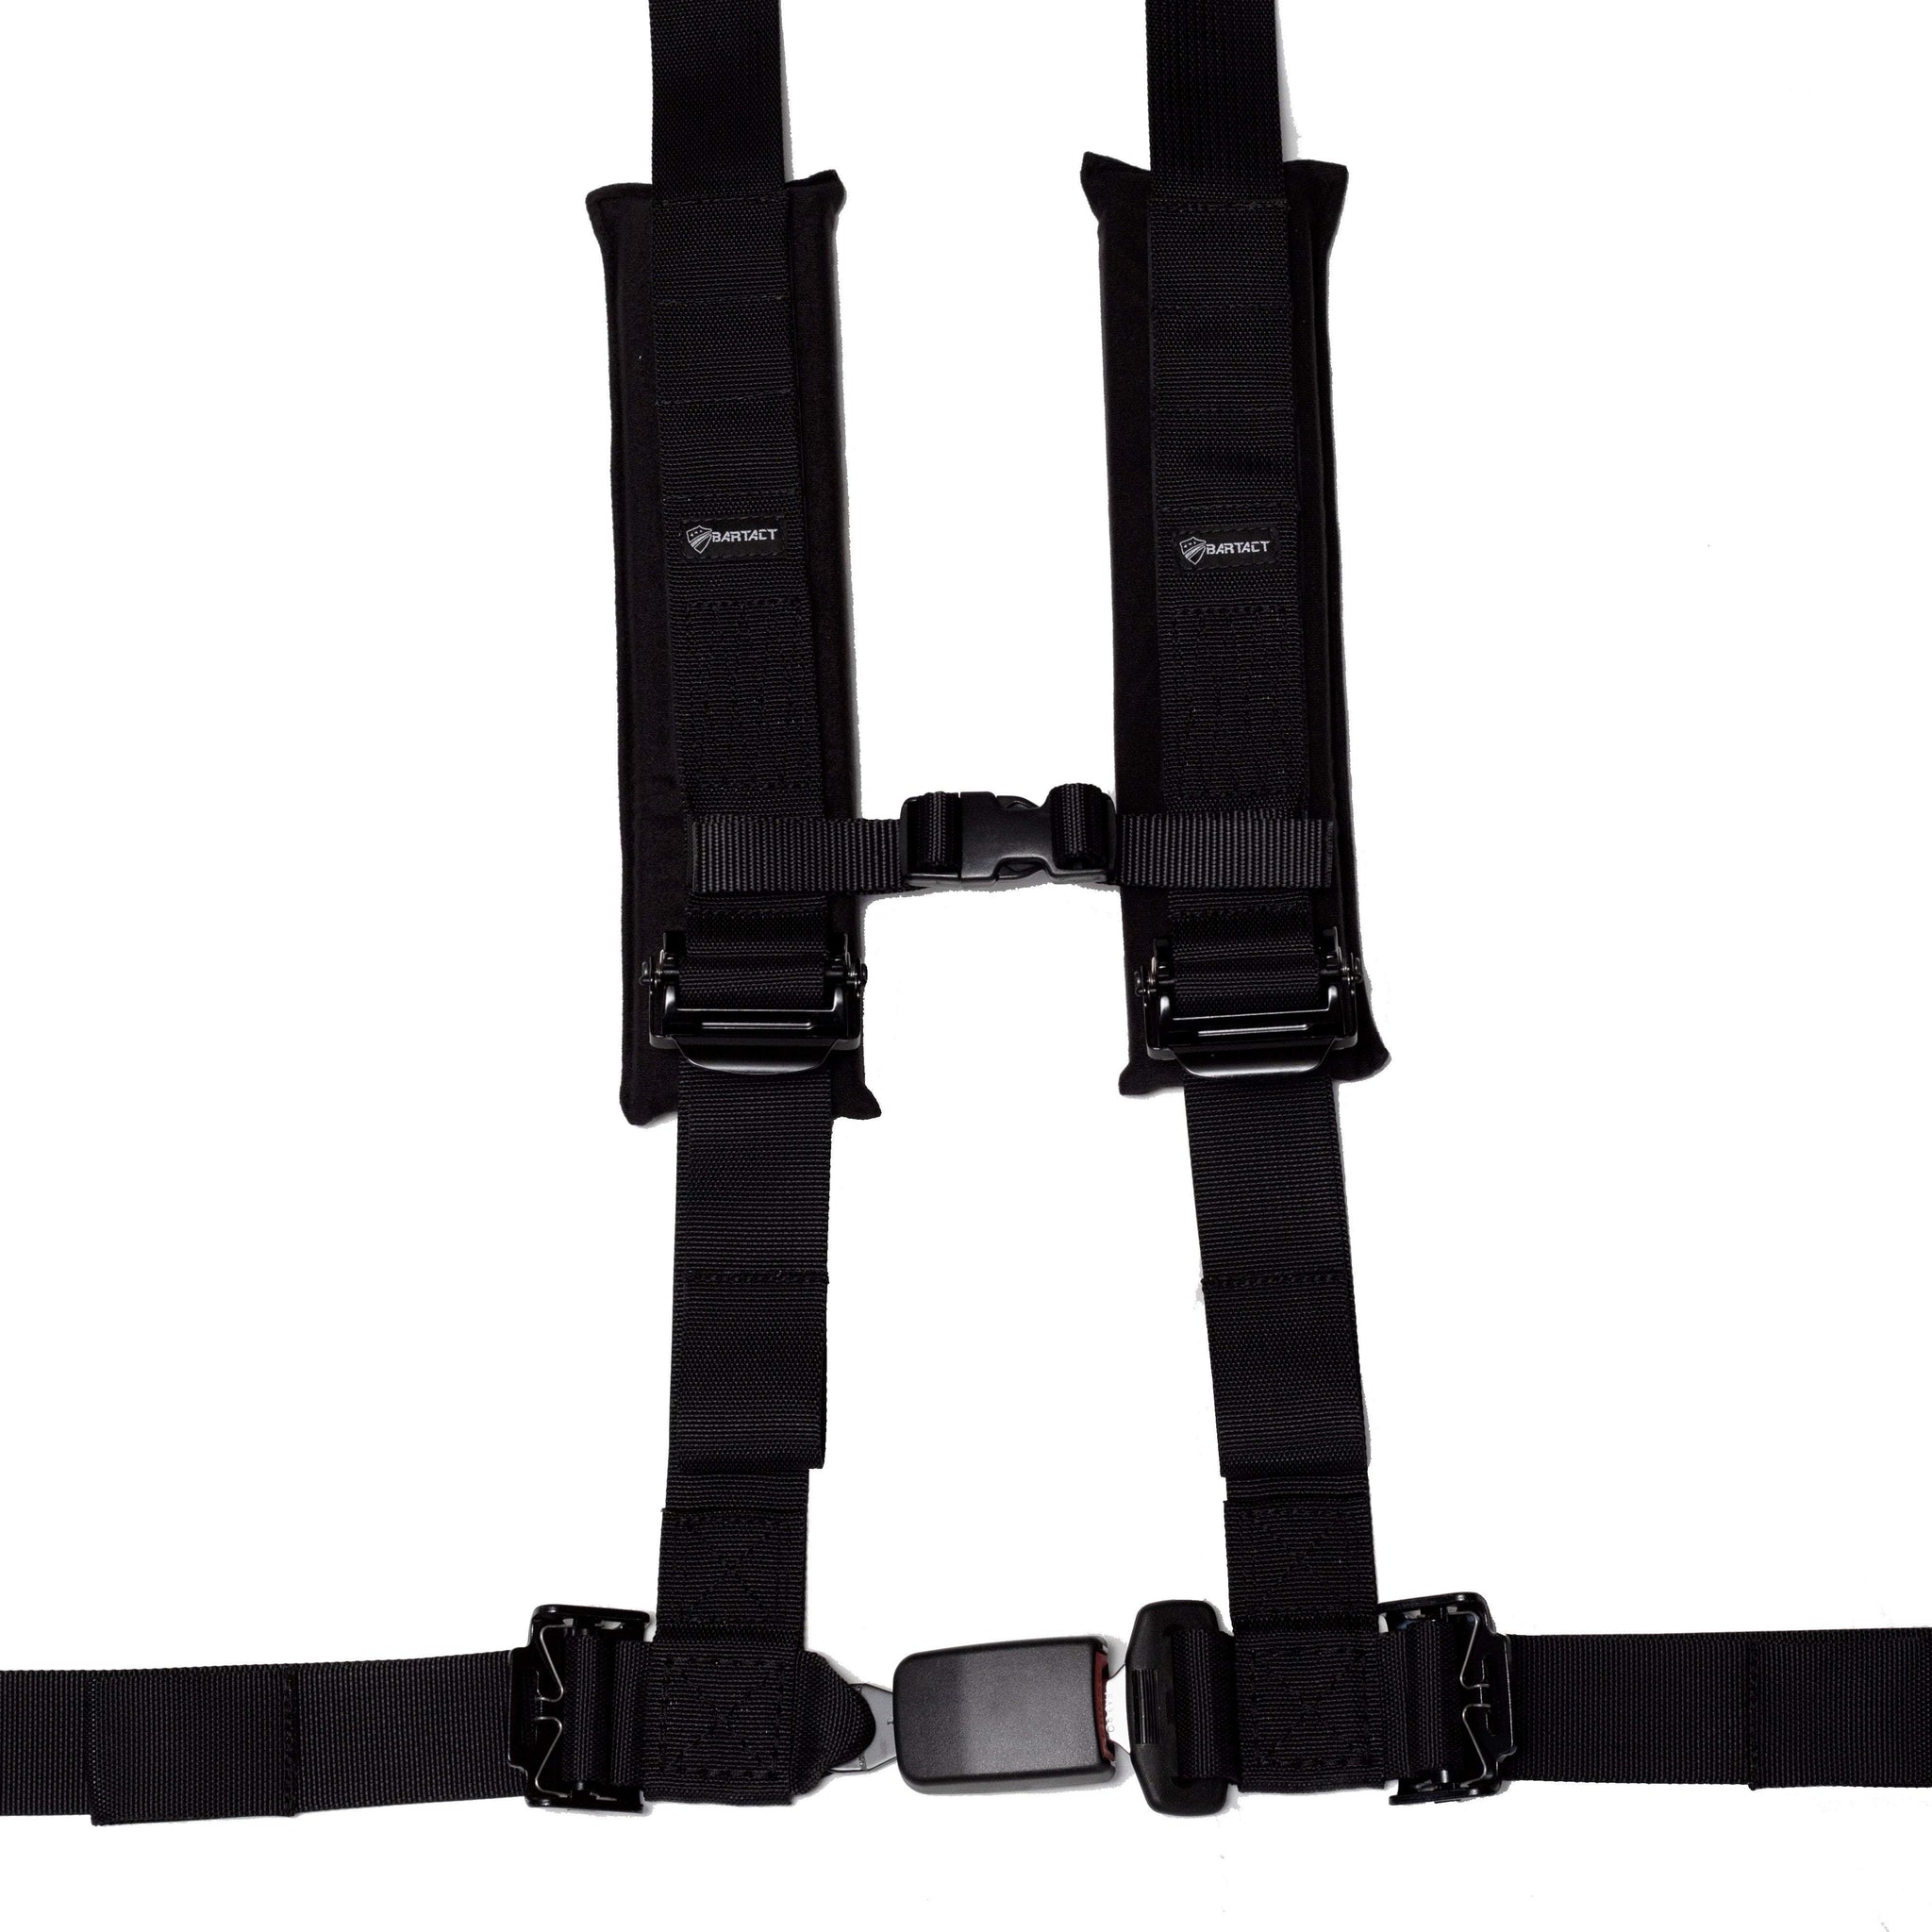 Universal Seat Belt Covers (PAIR) 12 inches tall, Bartact